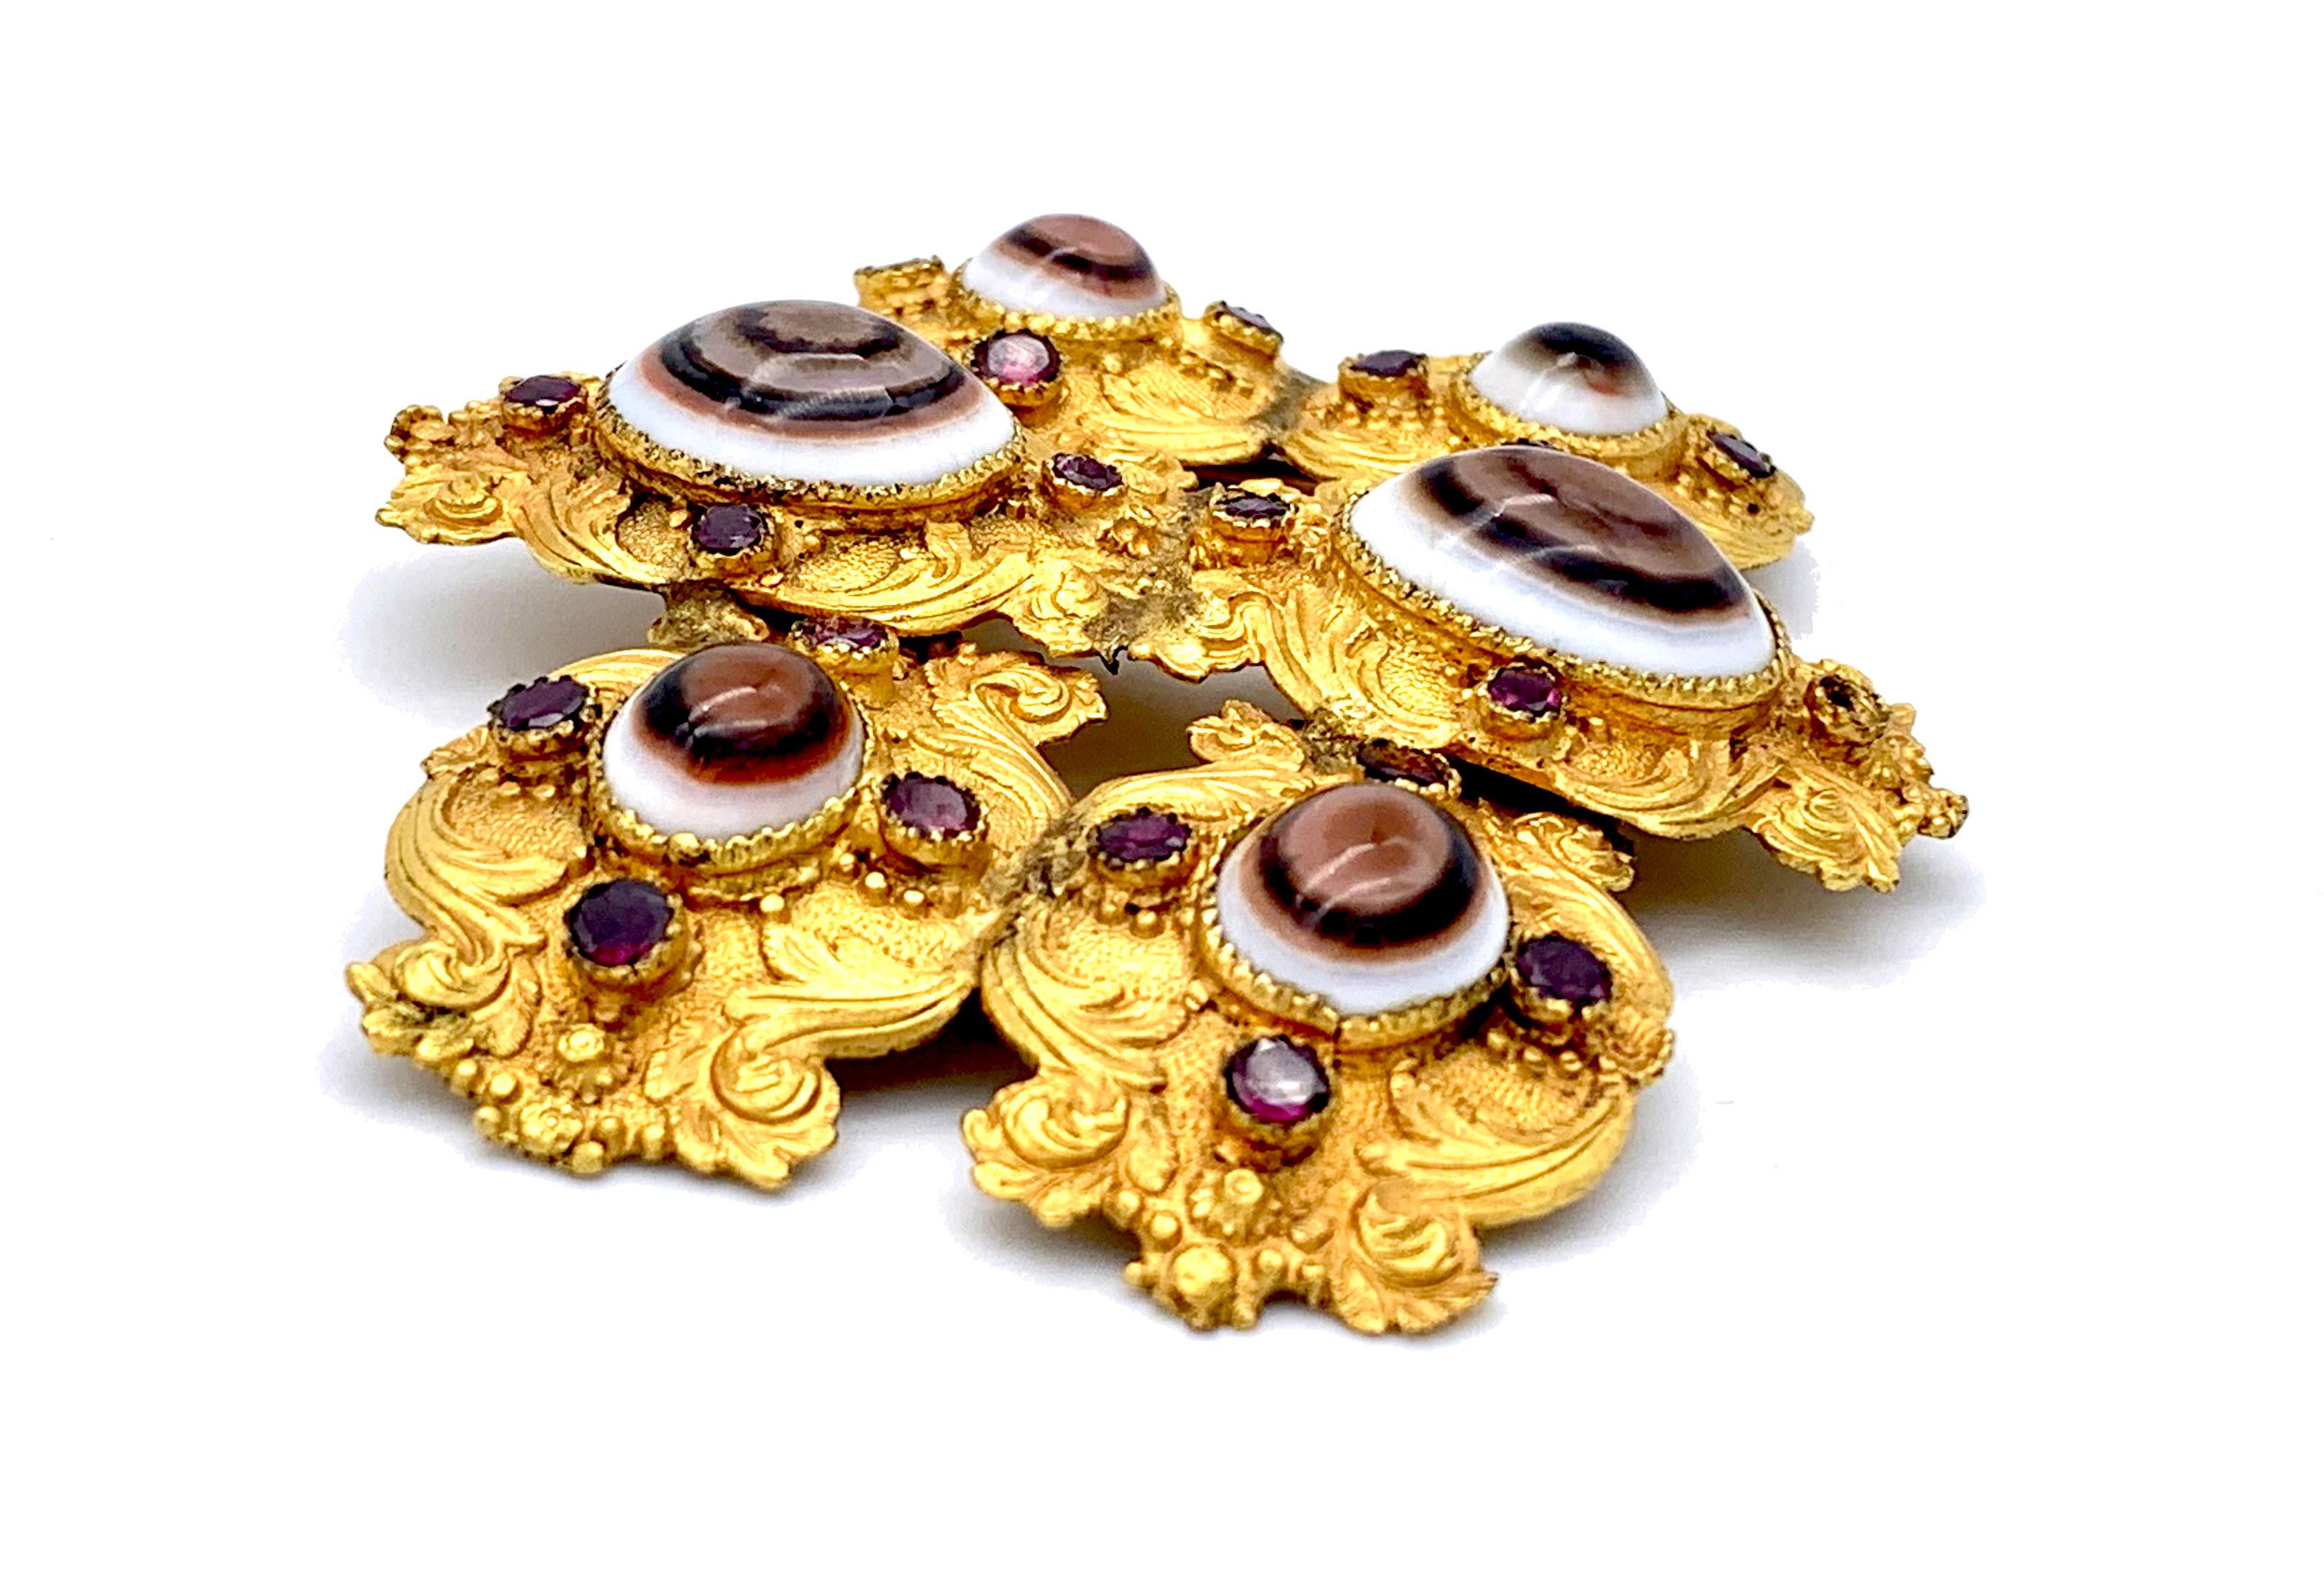 d This outstanding dress buckle uses the combination of flat cut garnets and banded agates chosen for their eye resemblance. Agates cut this way have been used in jewellery since antiquity all around the word. They were given the power to ward off